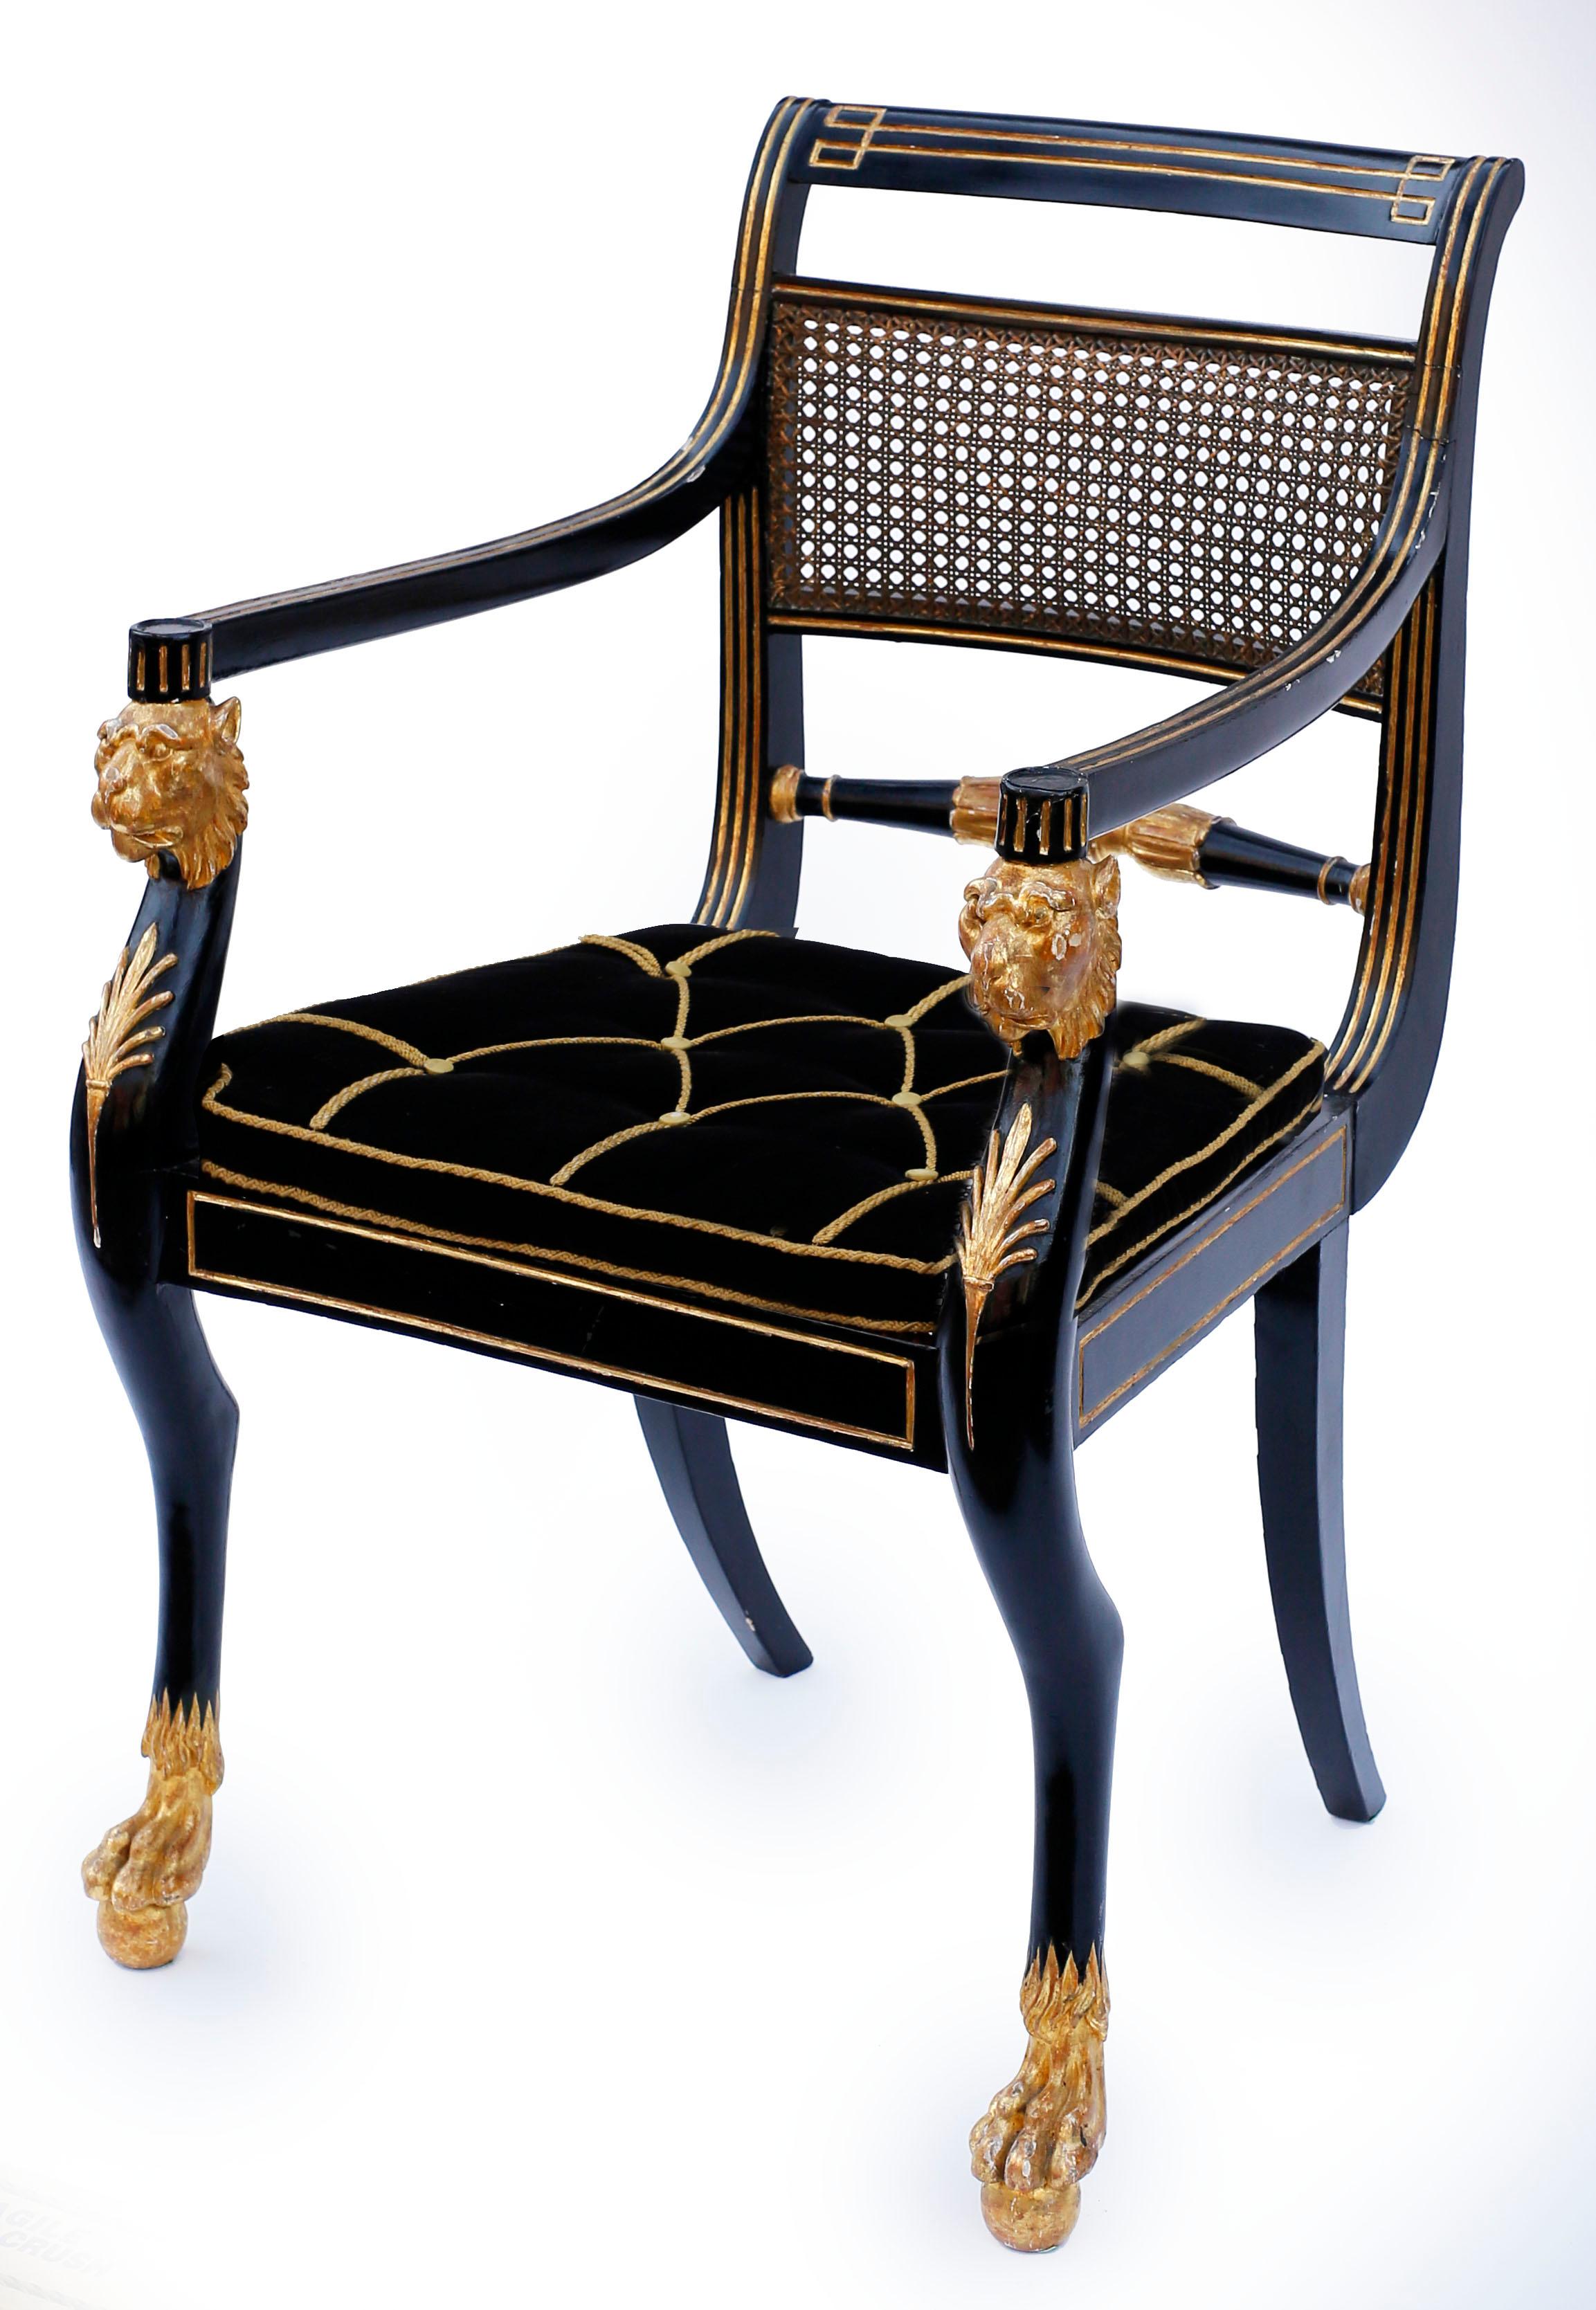 A stunning set of neoclassical ebonized and giltwood chairs attributed firmly to Gillows of Lancaster and London and inspired by the forms of Regency designer George Smith. These chairs are identical to a set supplied by Gillows to Colonel Hugh